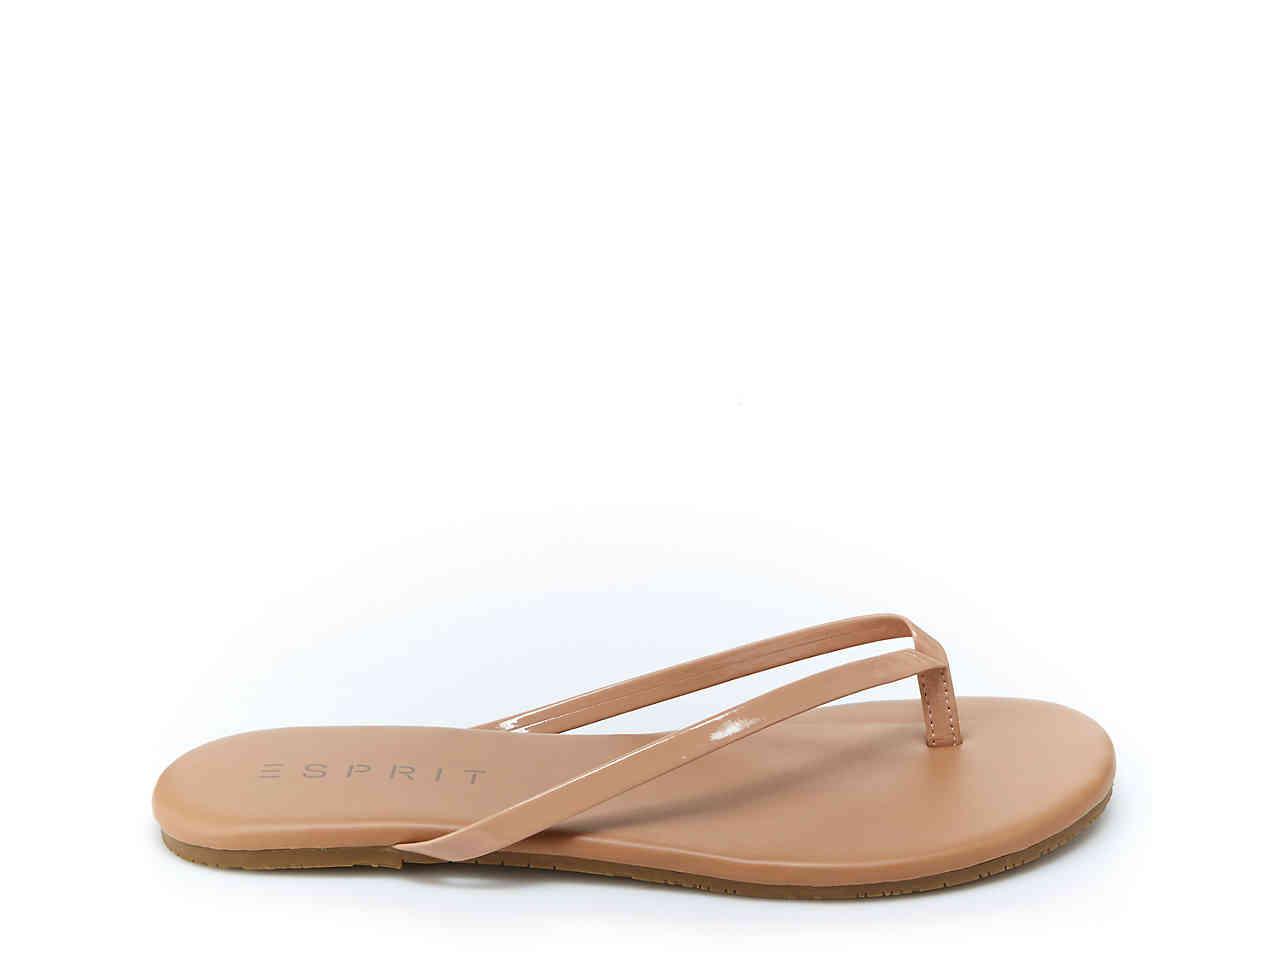 Esprit Party Flip Flop in Nude (Natural) | Lyst